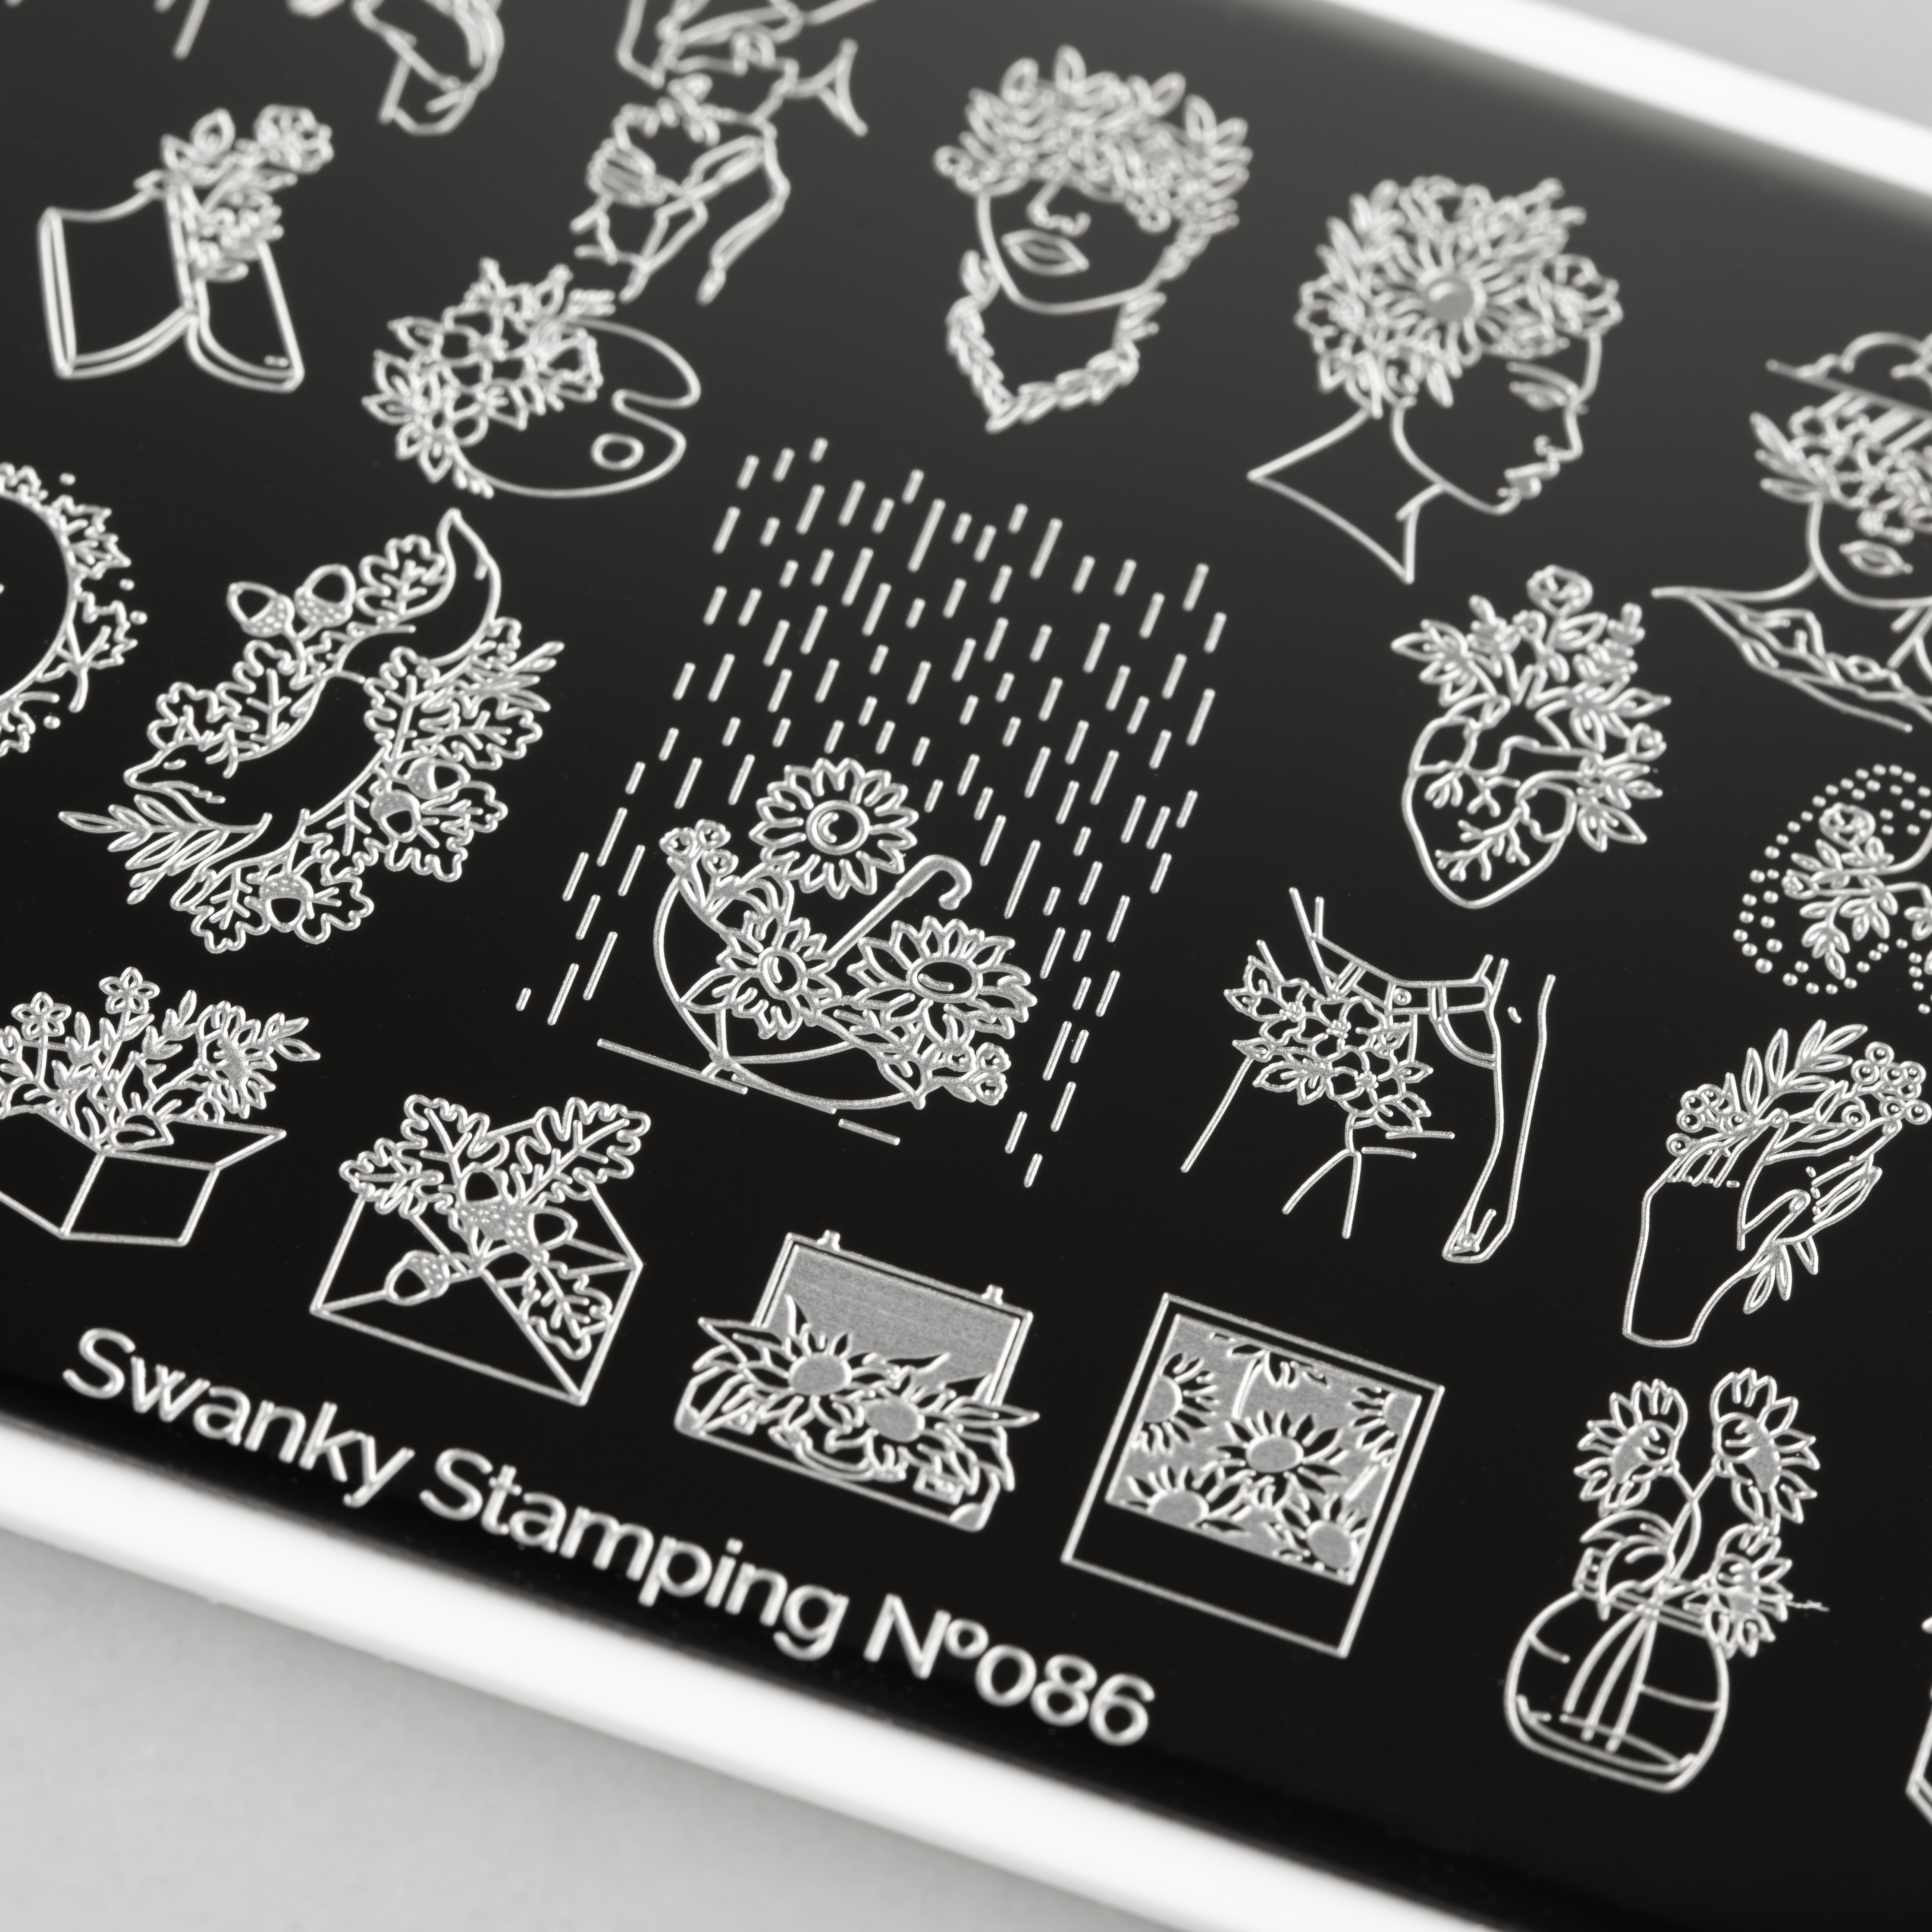 Swanky Stamping, Пластина 086